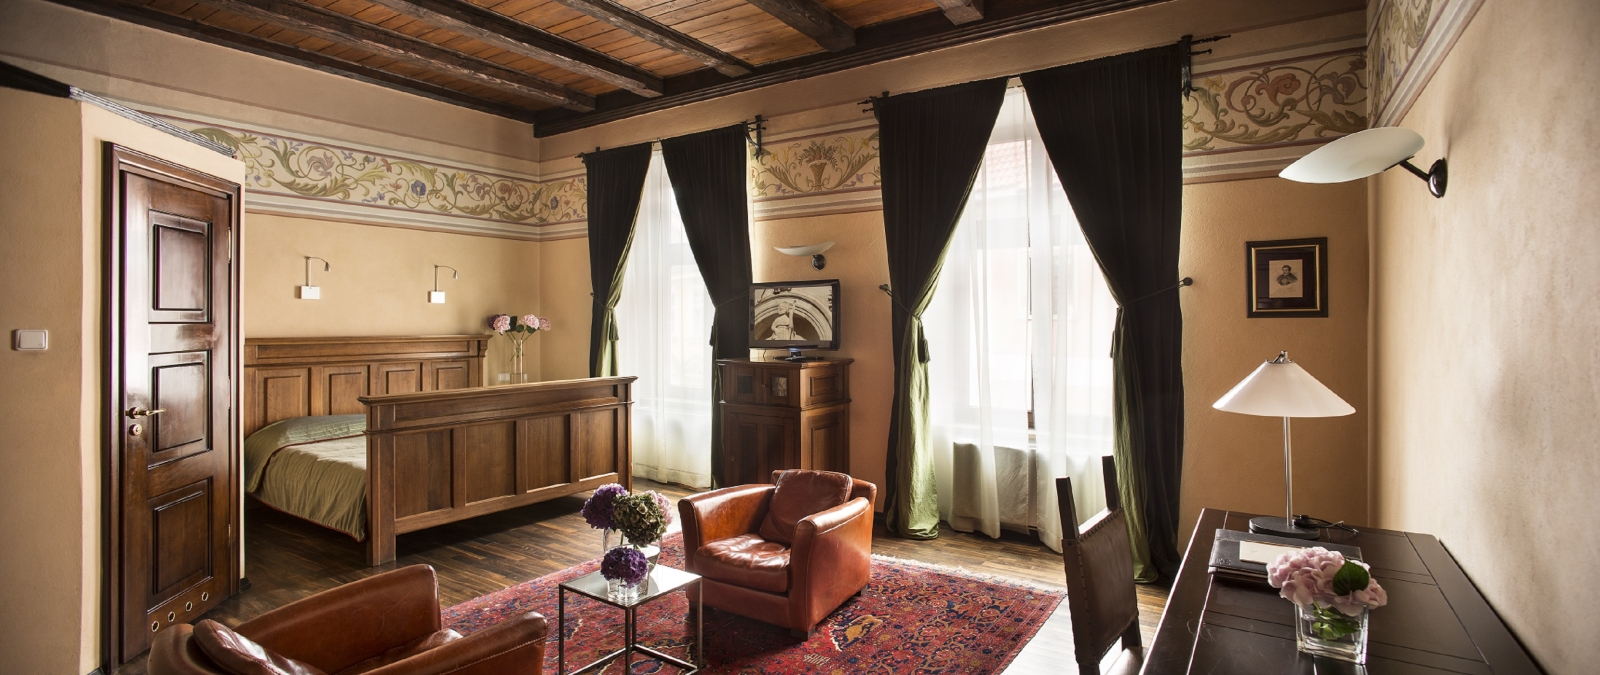 Luxury double room at Hotel Copernicus in Poland